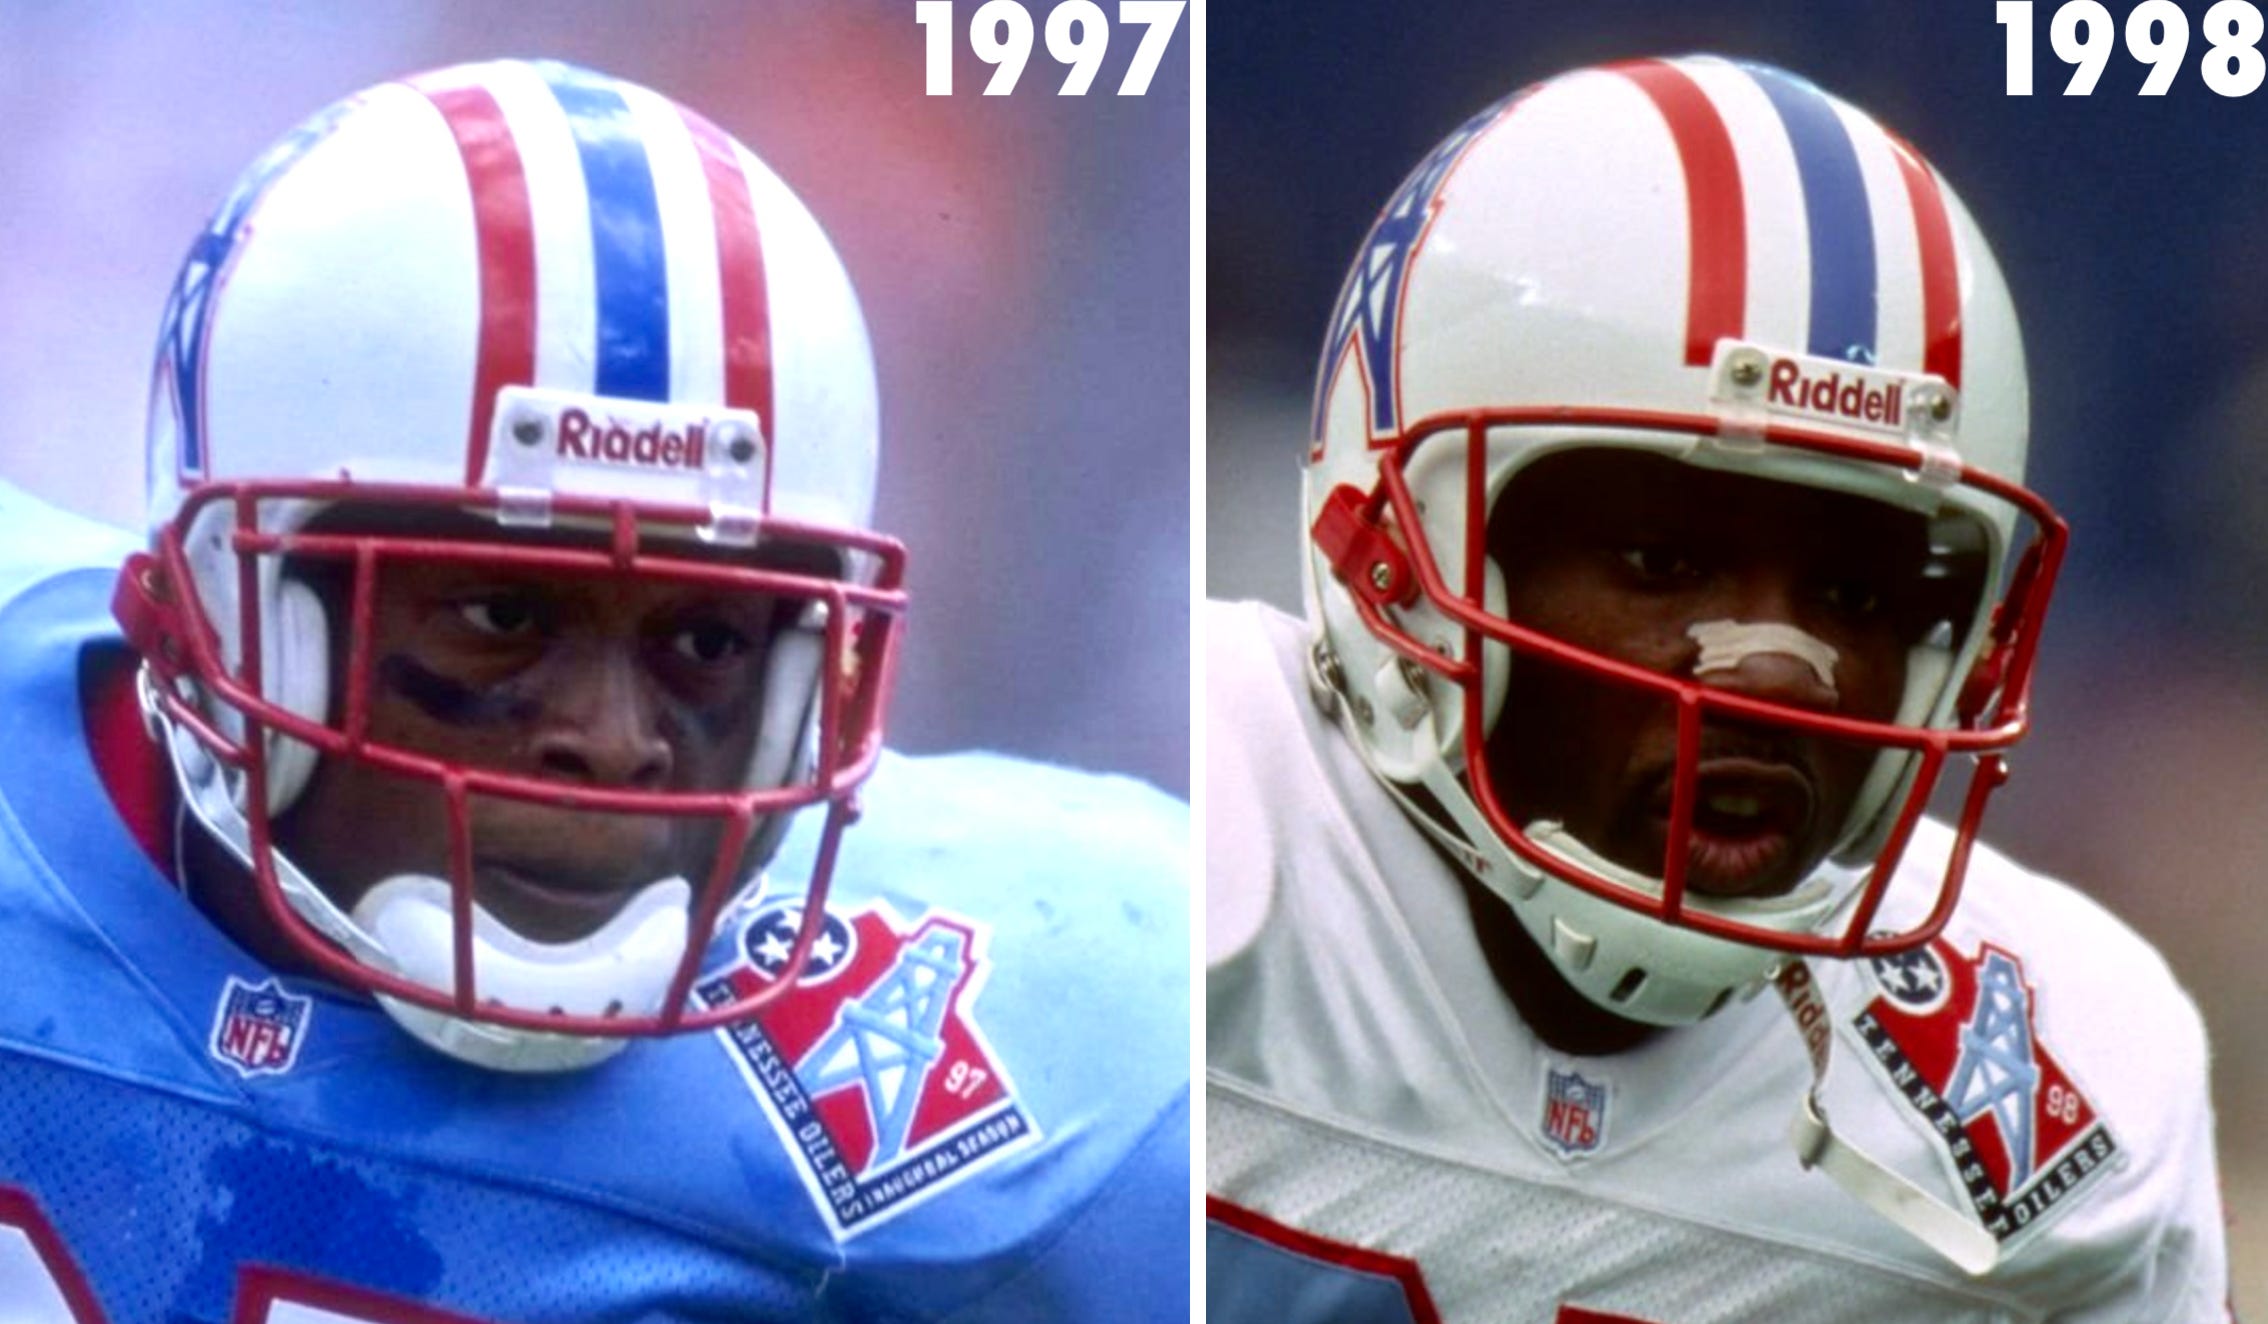 A Deep Dive on the Houston Oilers' Uniforms - by Paul Lukas